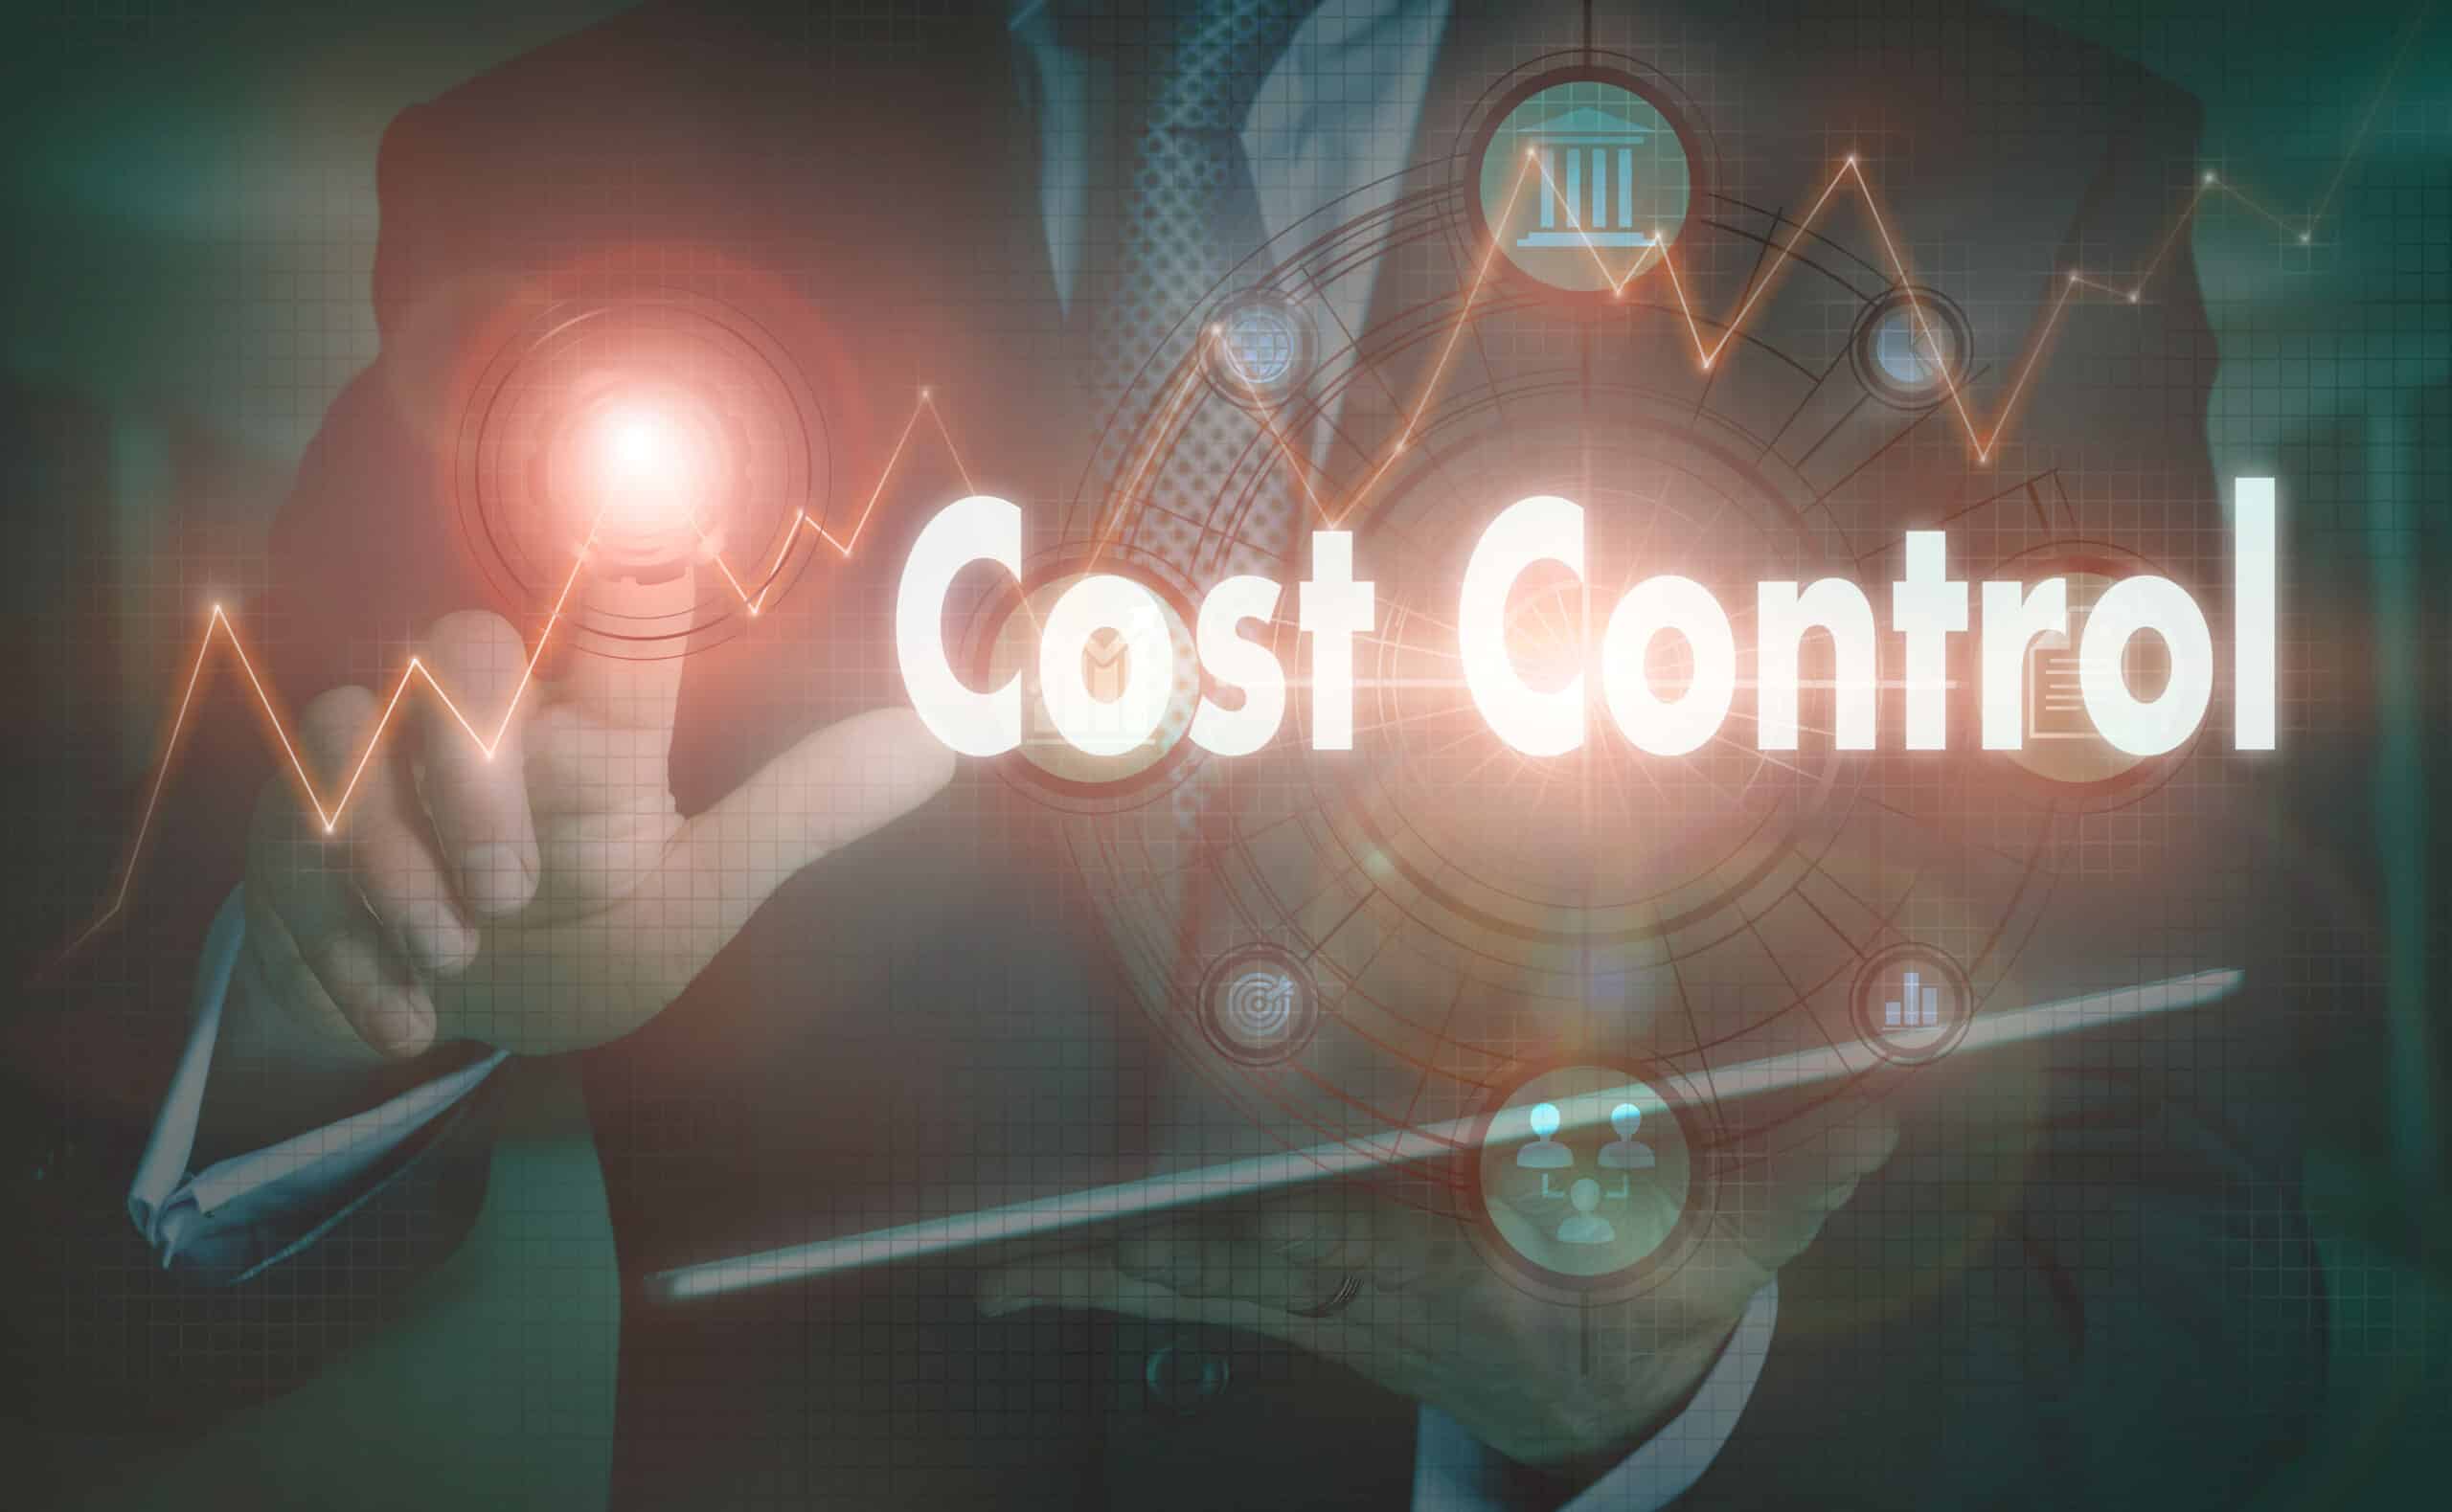 Save money on Salesforce sandbox pricing represented by a VR image of a businessman and the words "cost control"